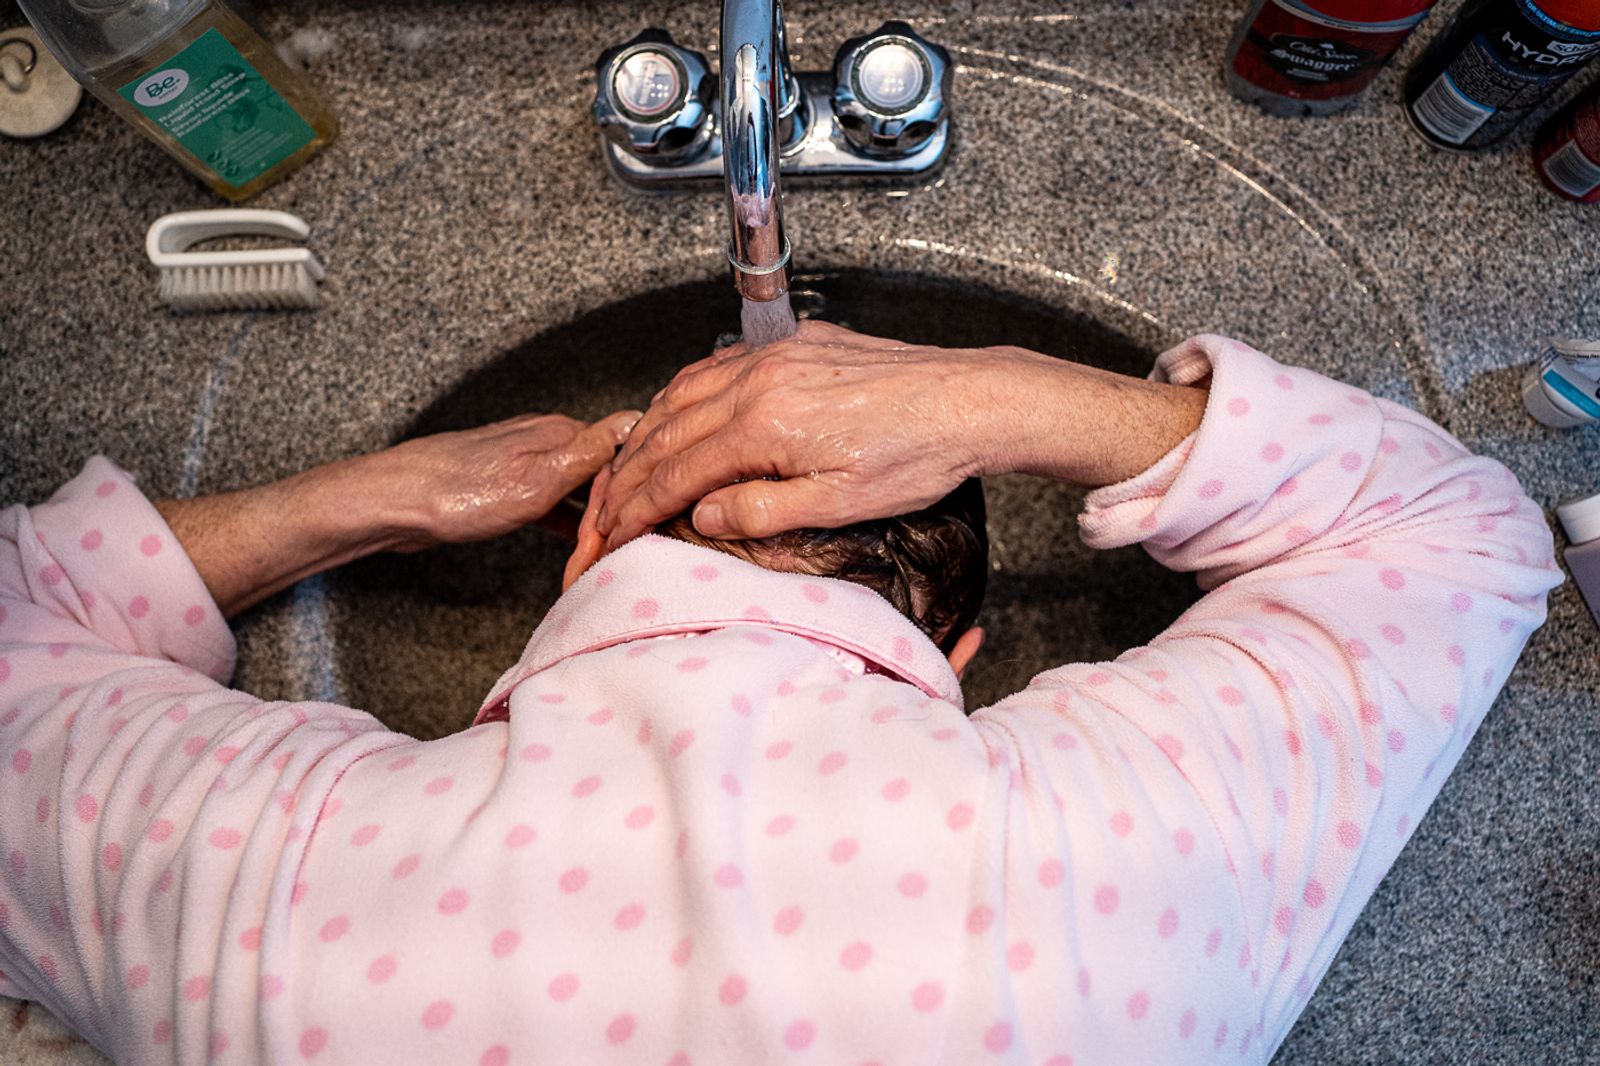 © Bobbi Barbarich - She feels great relief in being able to wash her own hair when she returns from the hospital.